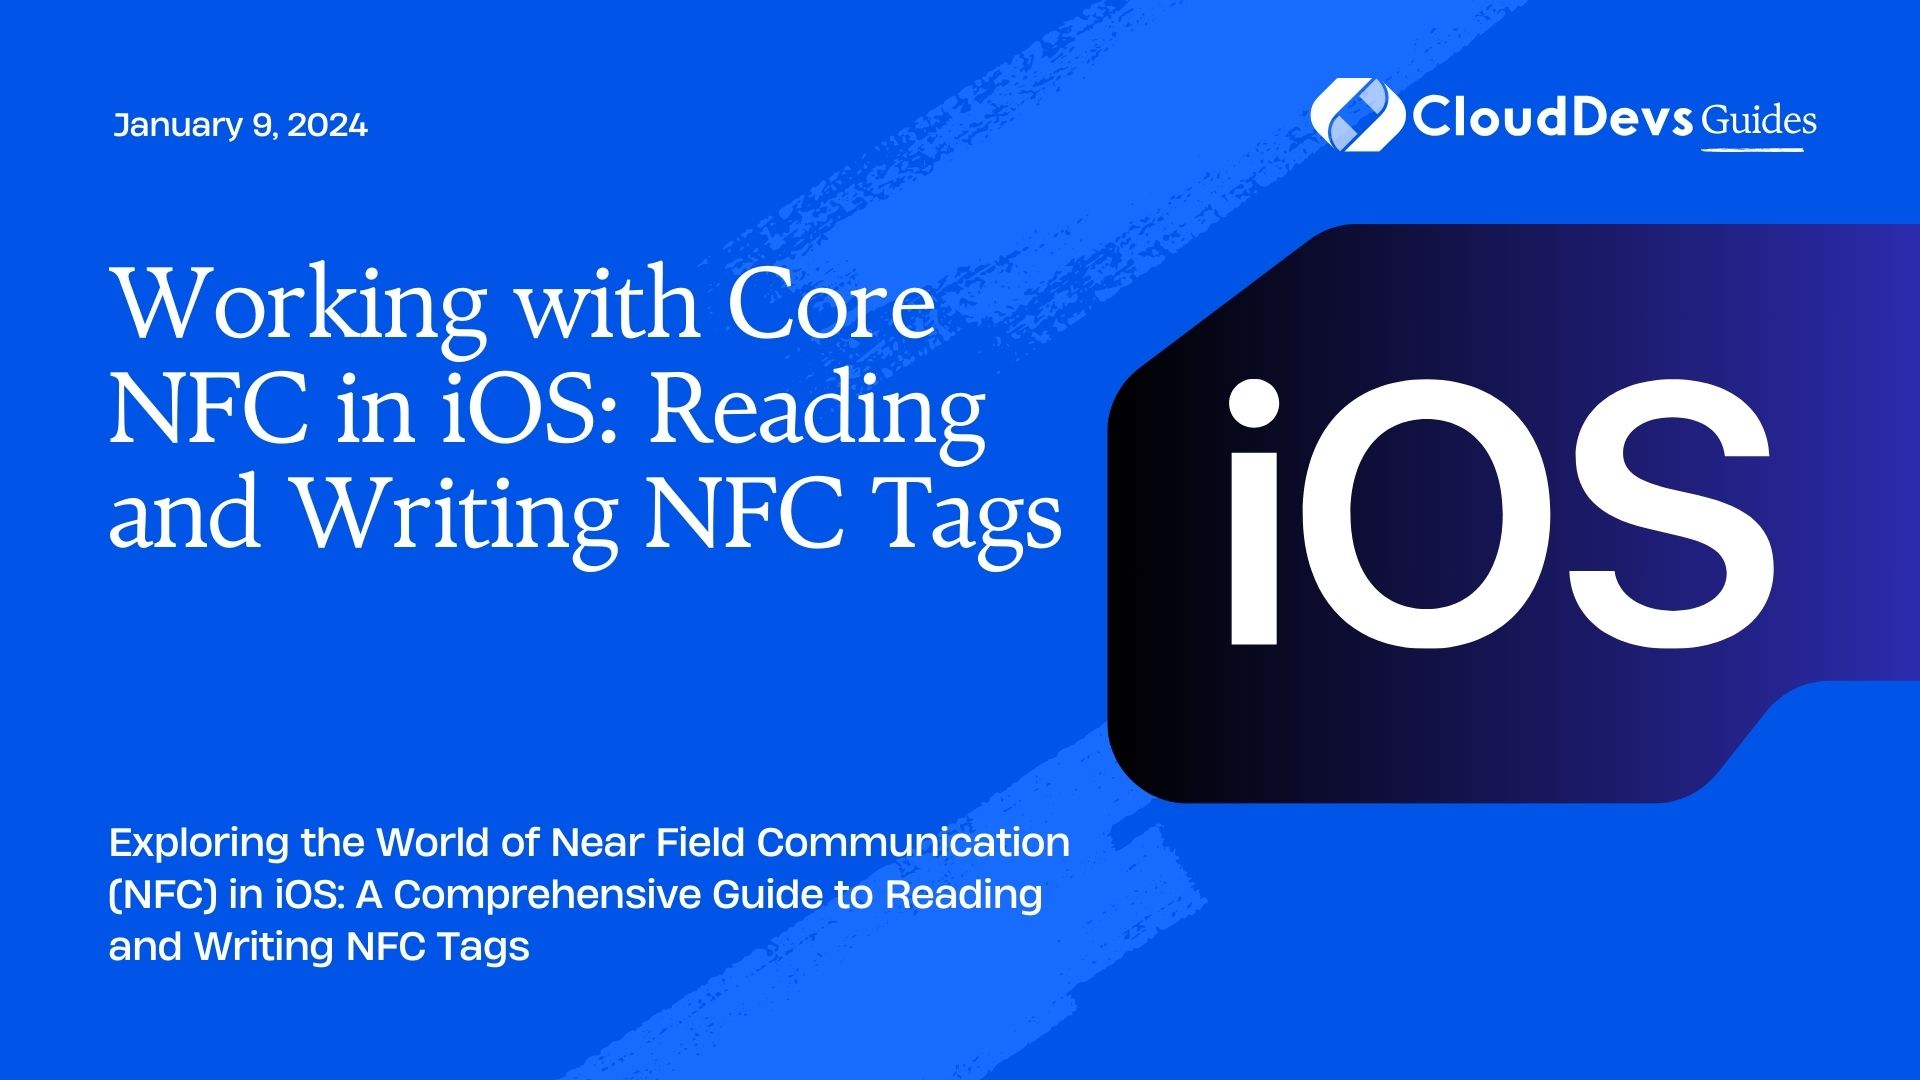 Working with Core NFC in iOS: Reading and Writing NFC Tags